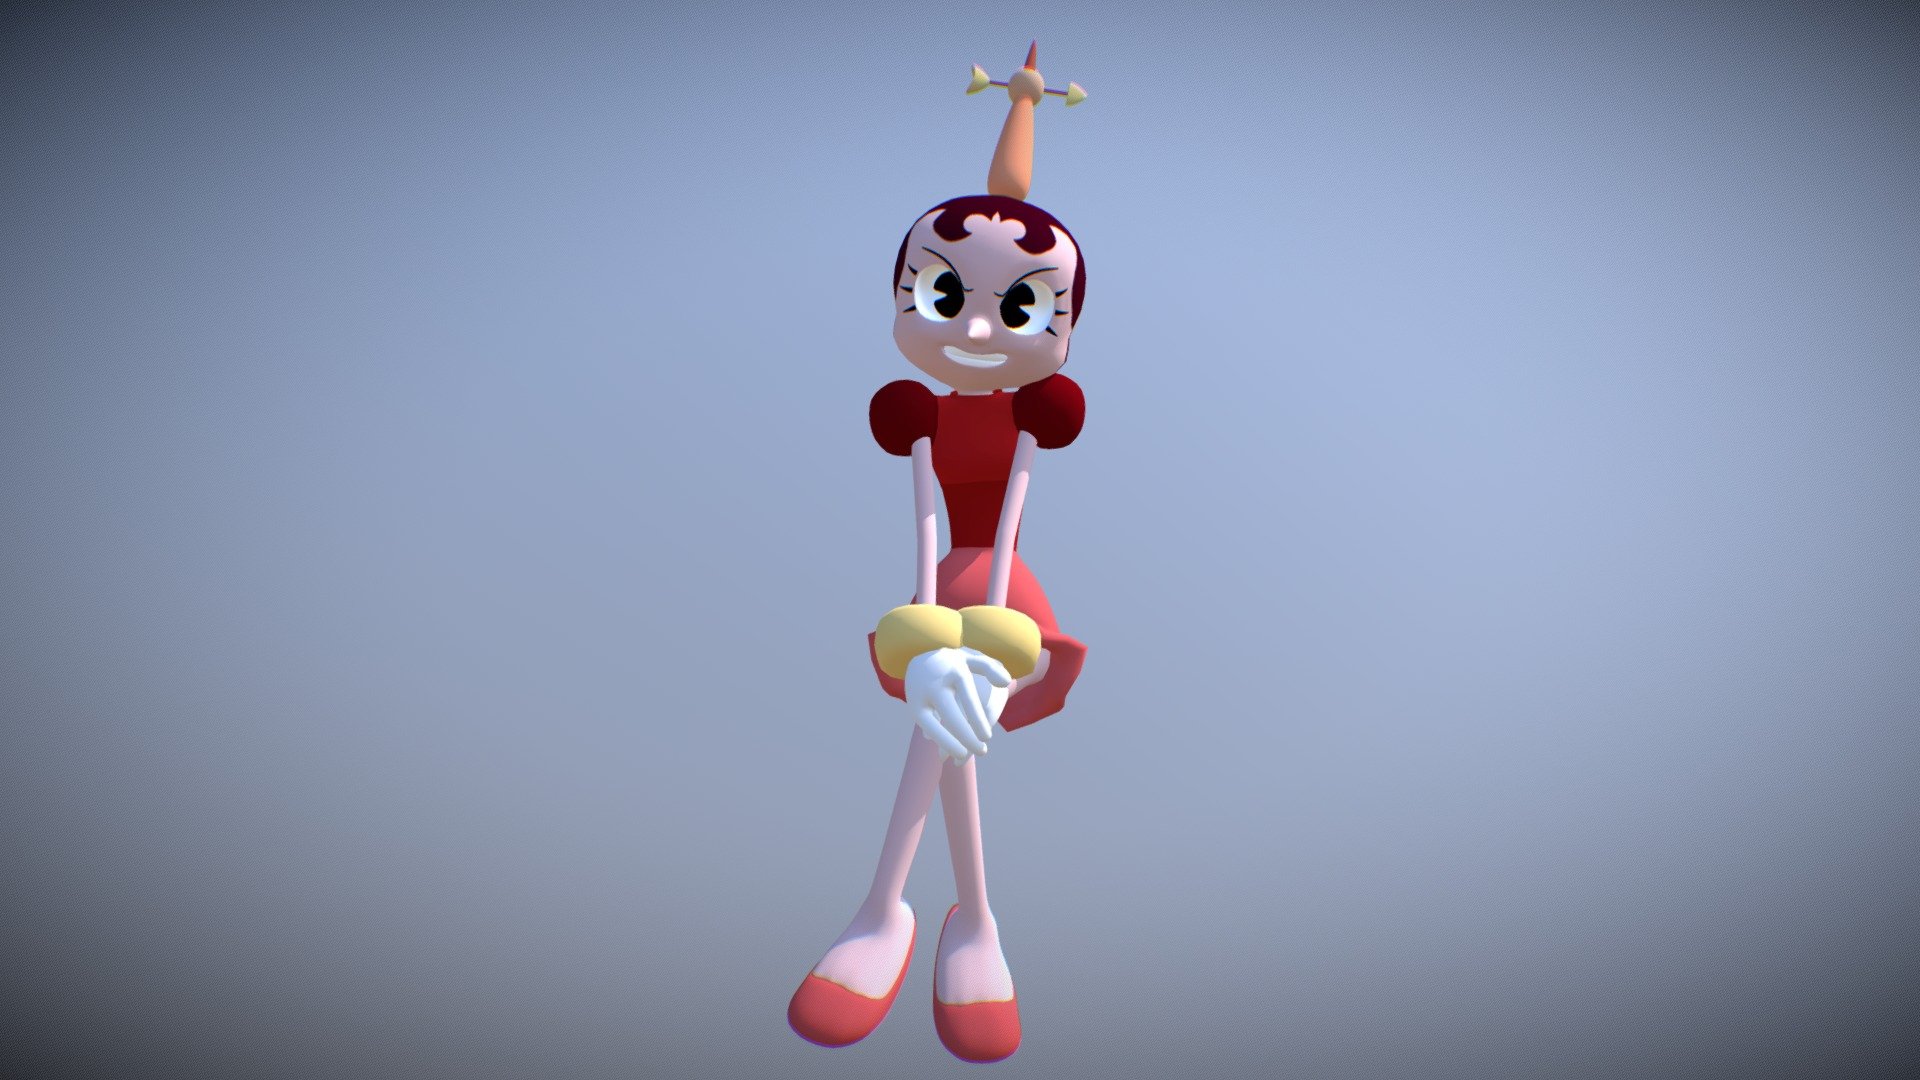 Hilda Whatcha Up To 3d Model By Placidone 7384d21 Sketchfab 1249